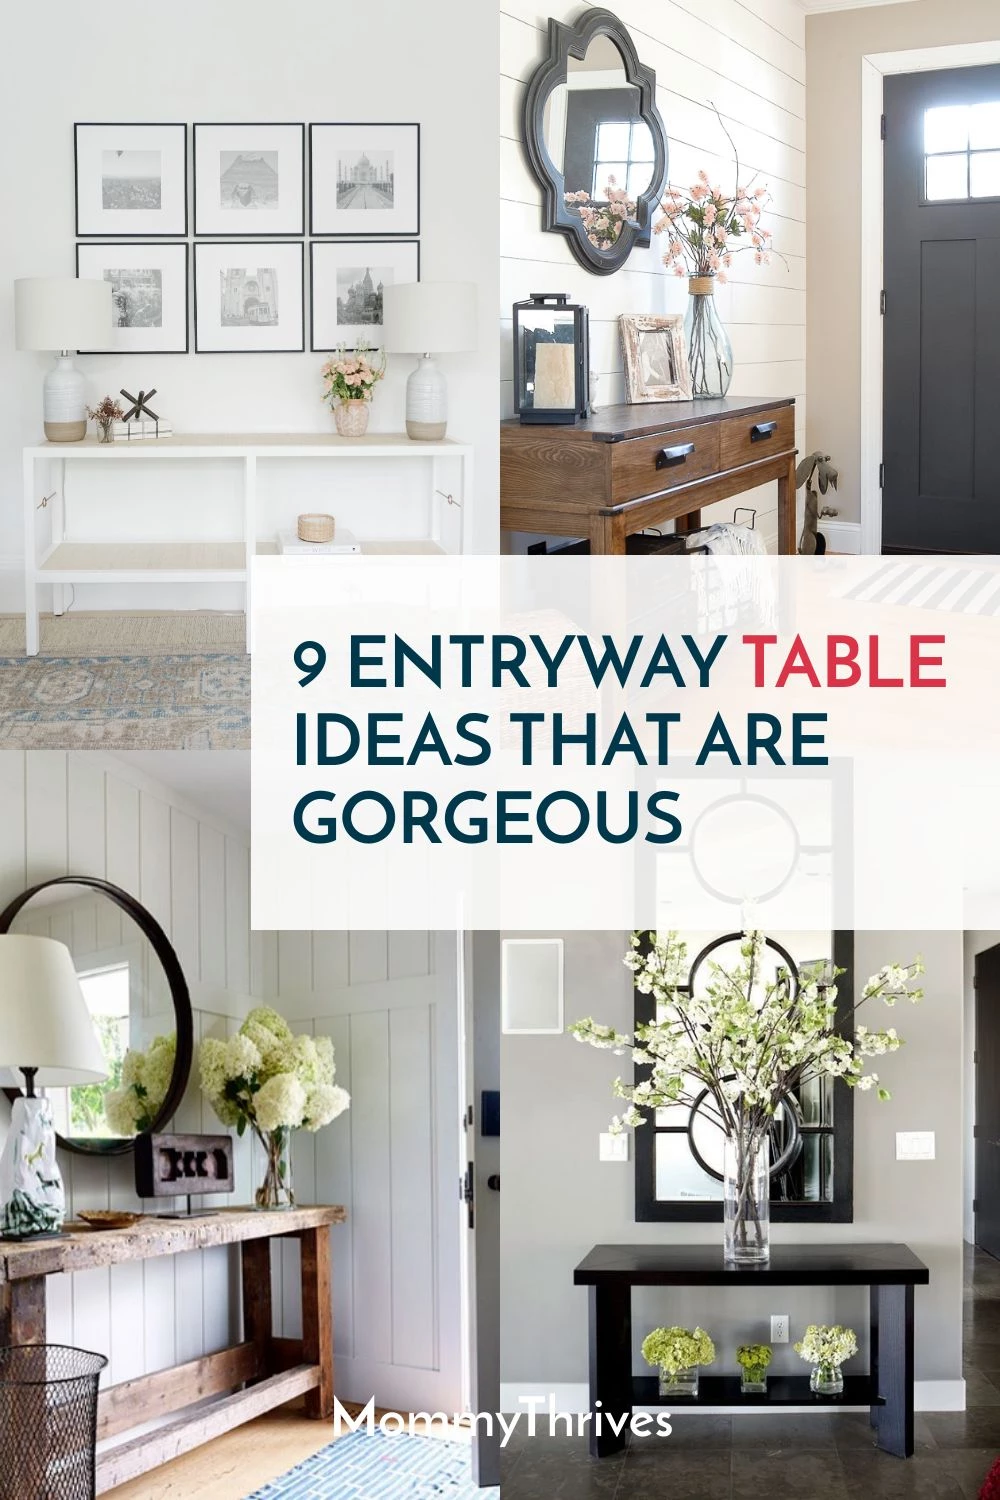 9 Entryway Table Ideas That Are Gorgeous - Mommythrives